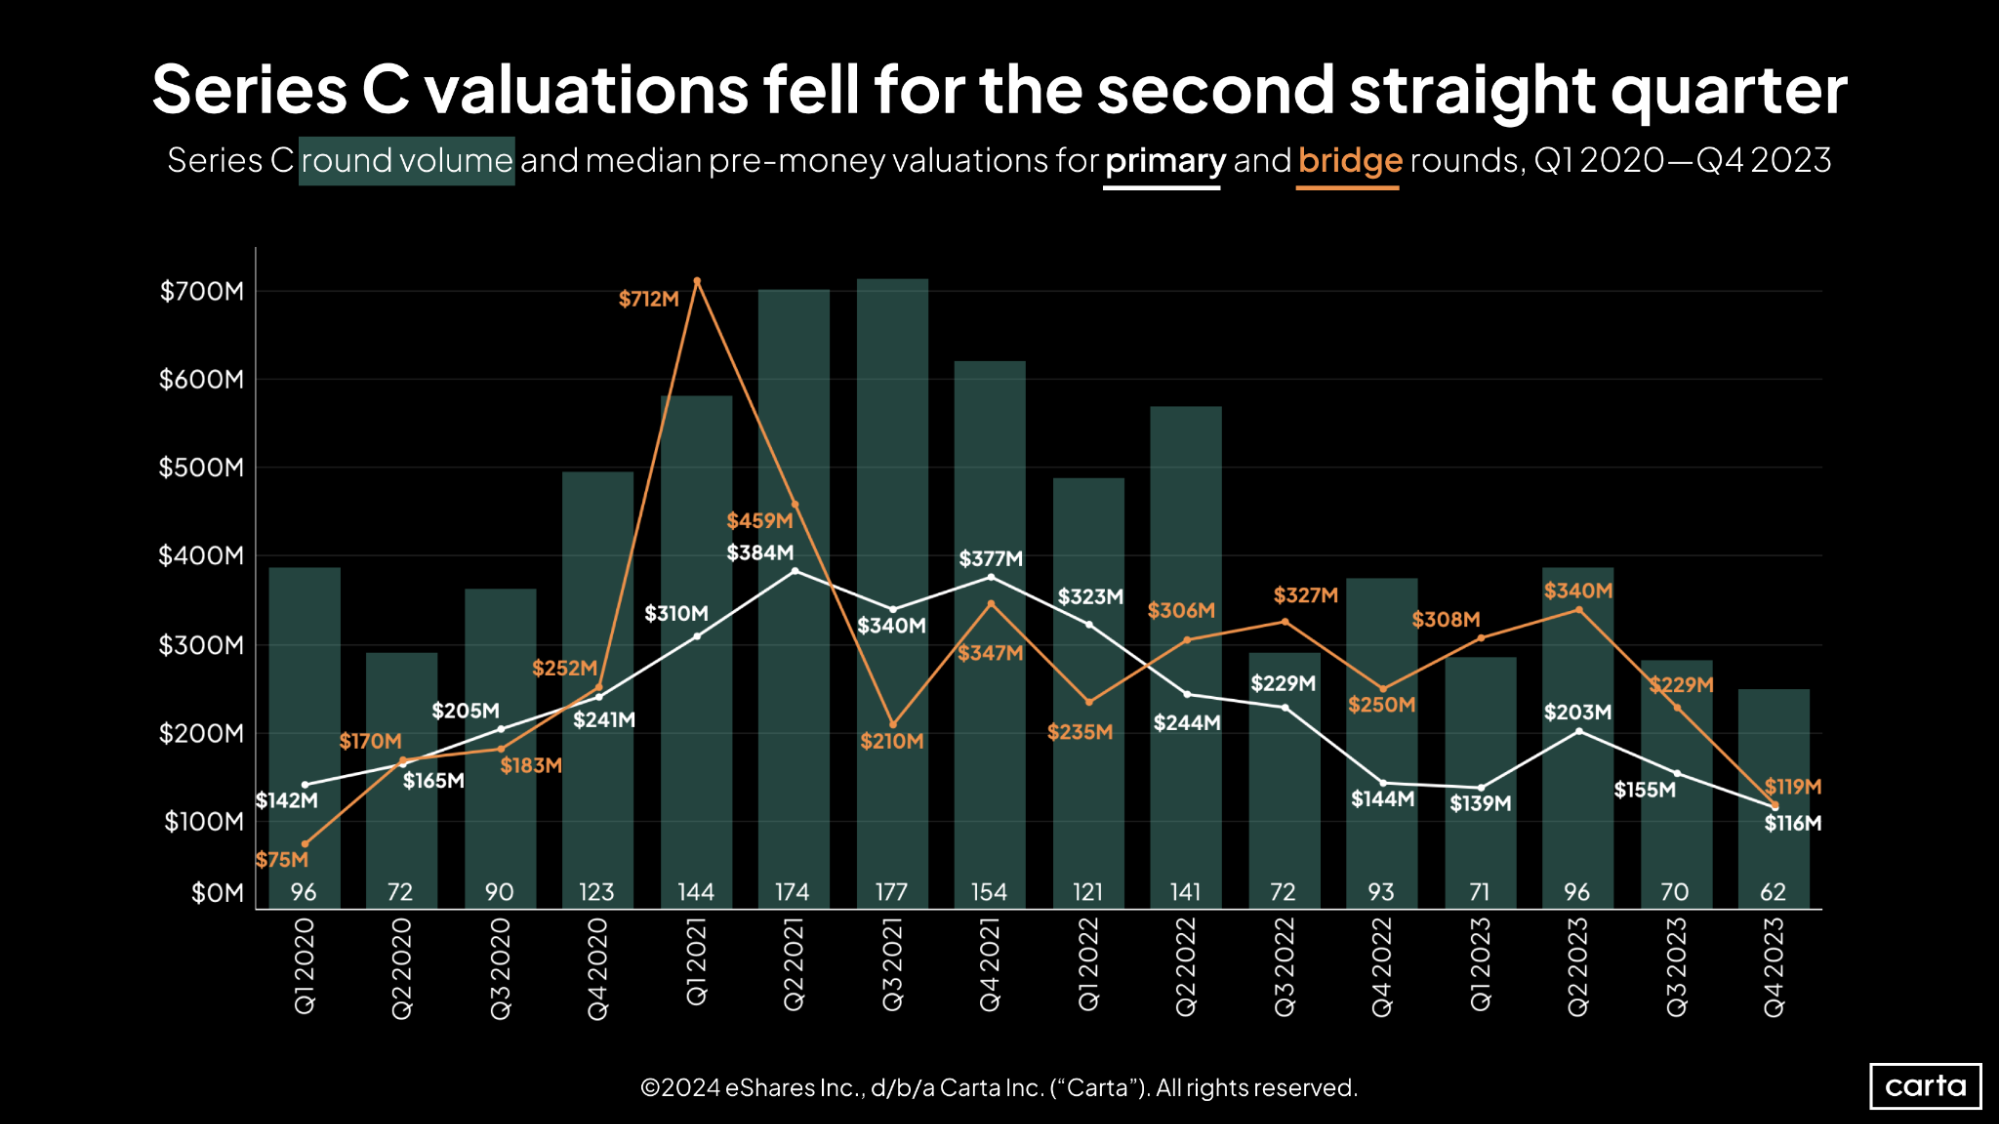 Carta SOPM Q4 2023 Series C valuations fell for the second straight quarter